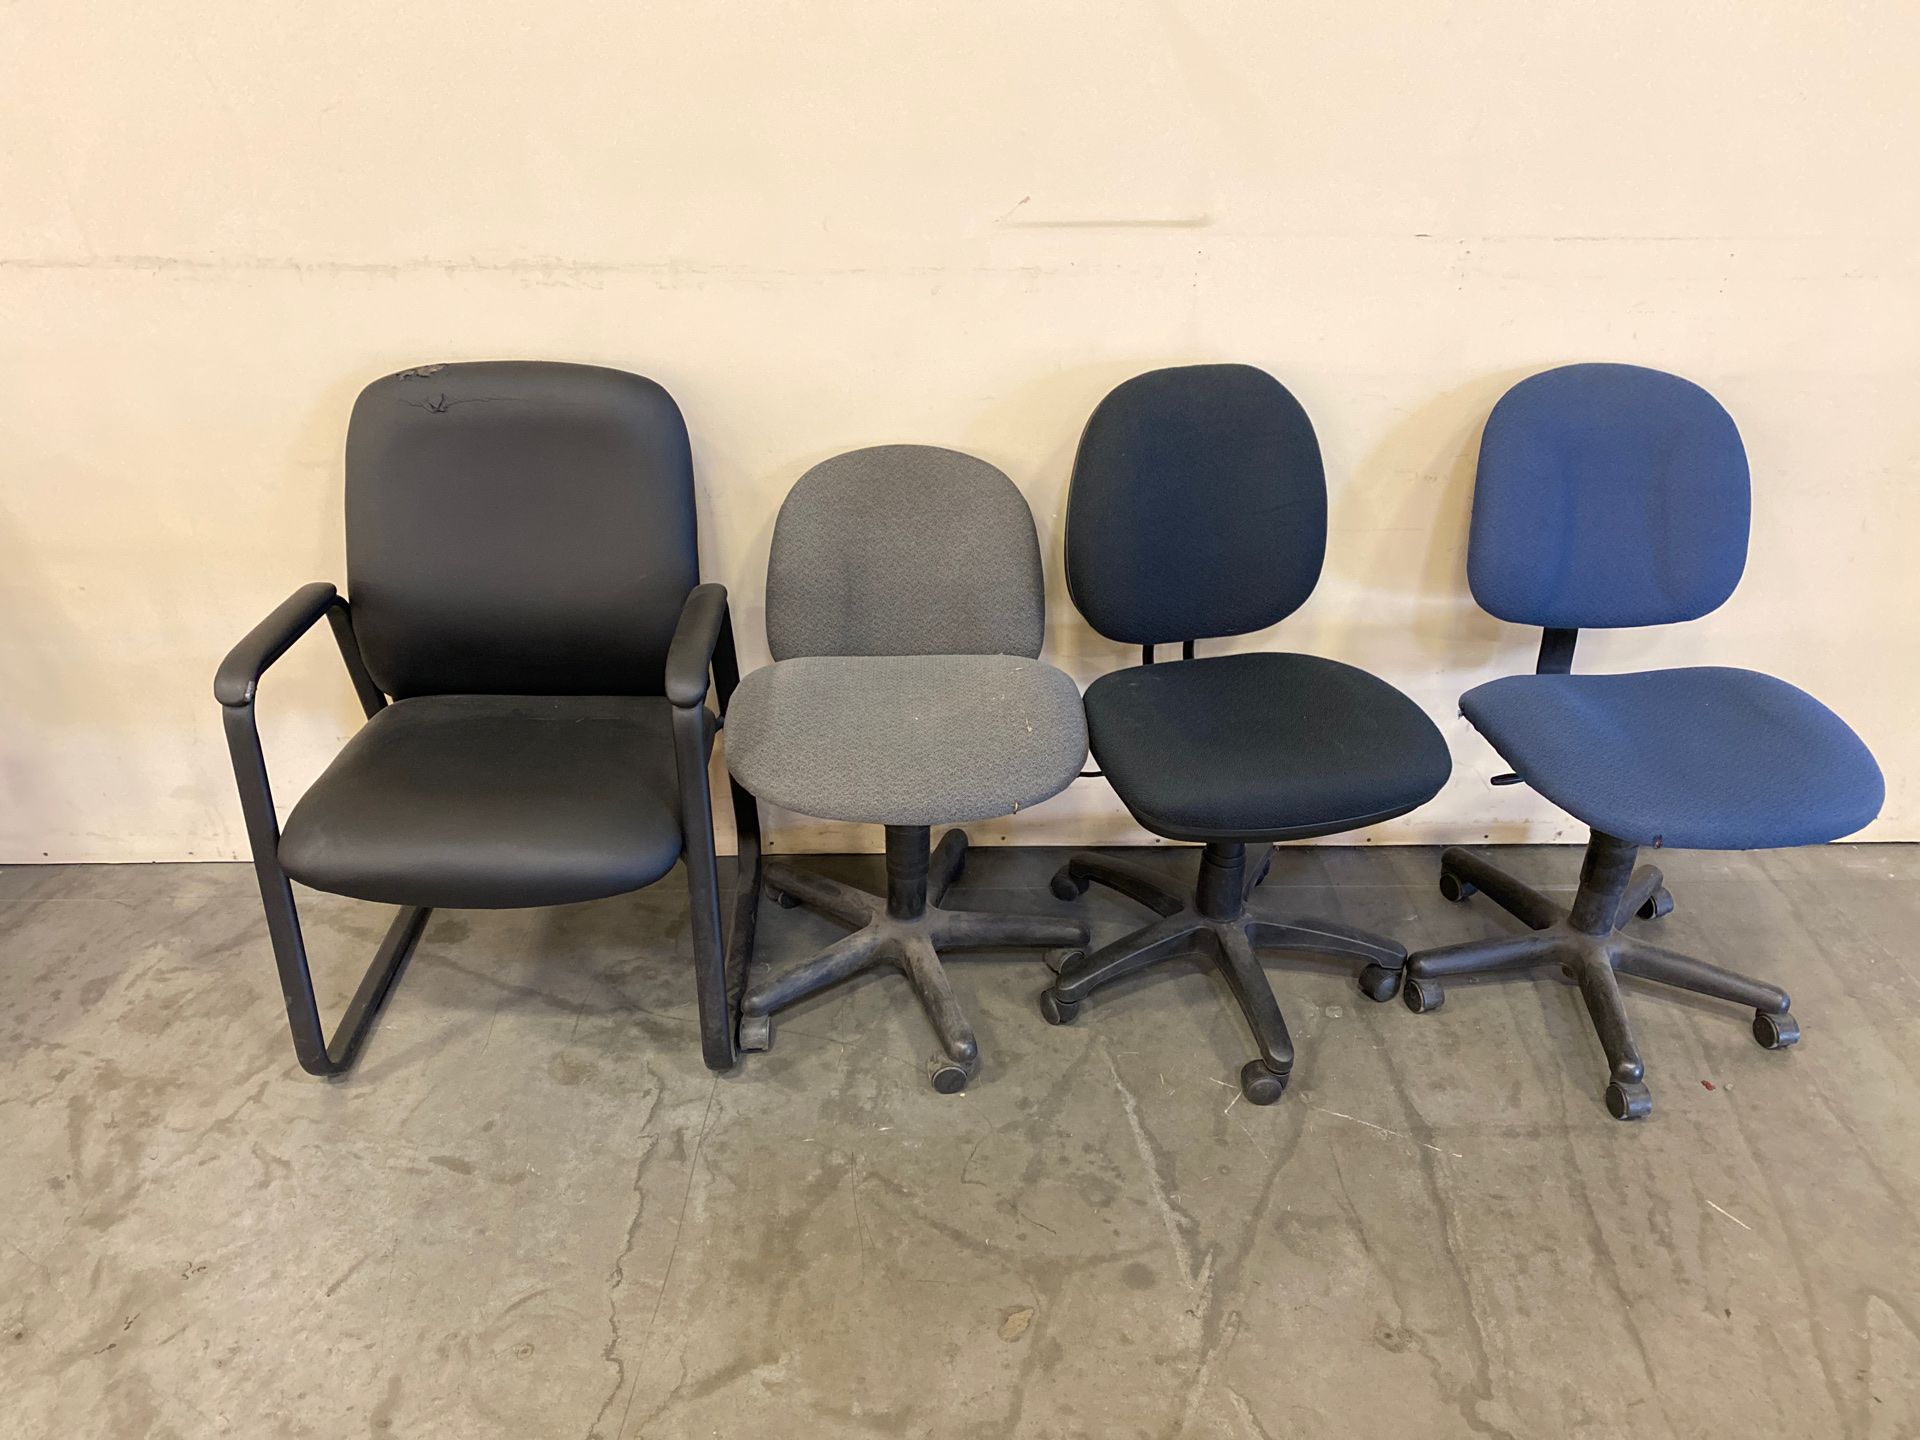 4 chairs for FREE